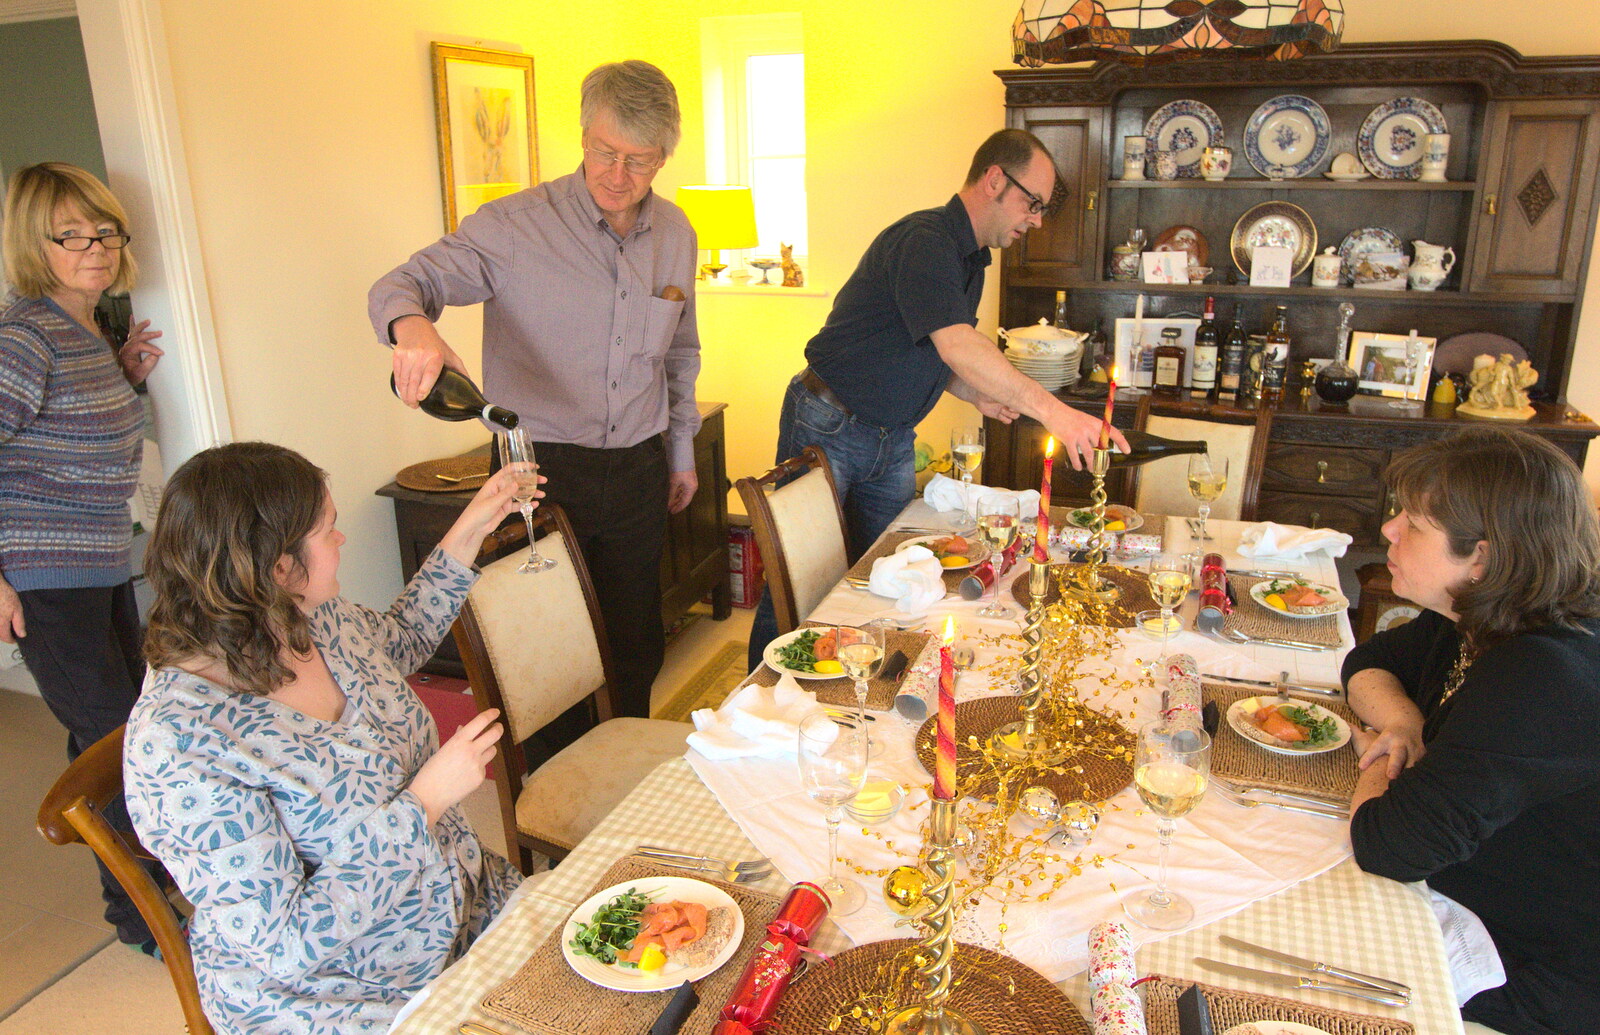 More wine is poured from Christmas Day in Spreyton, Devon - 25th December 2012